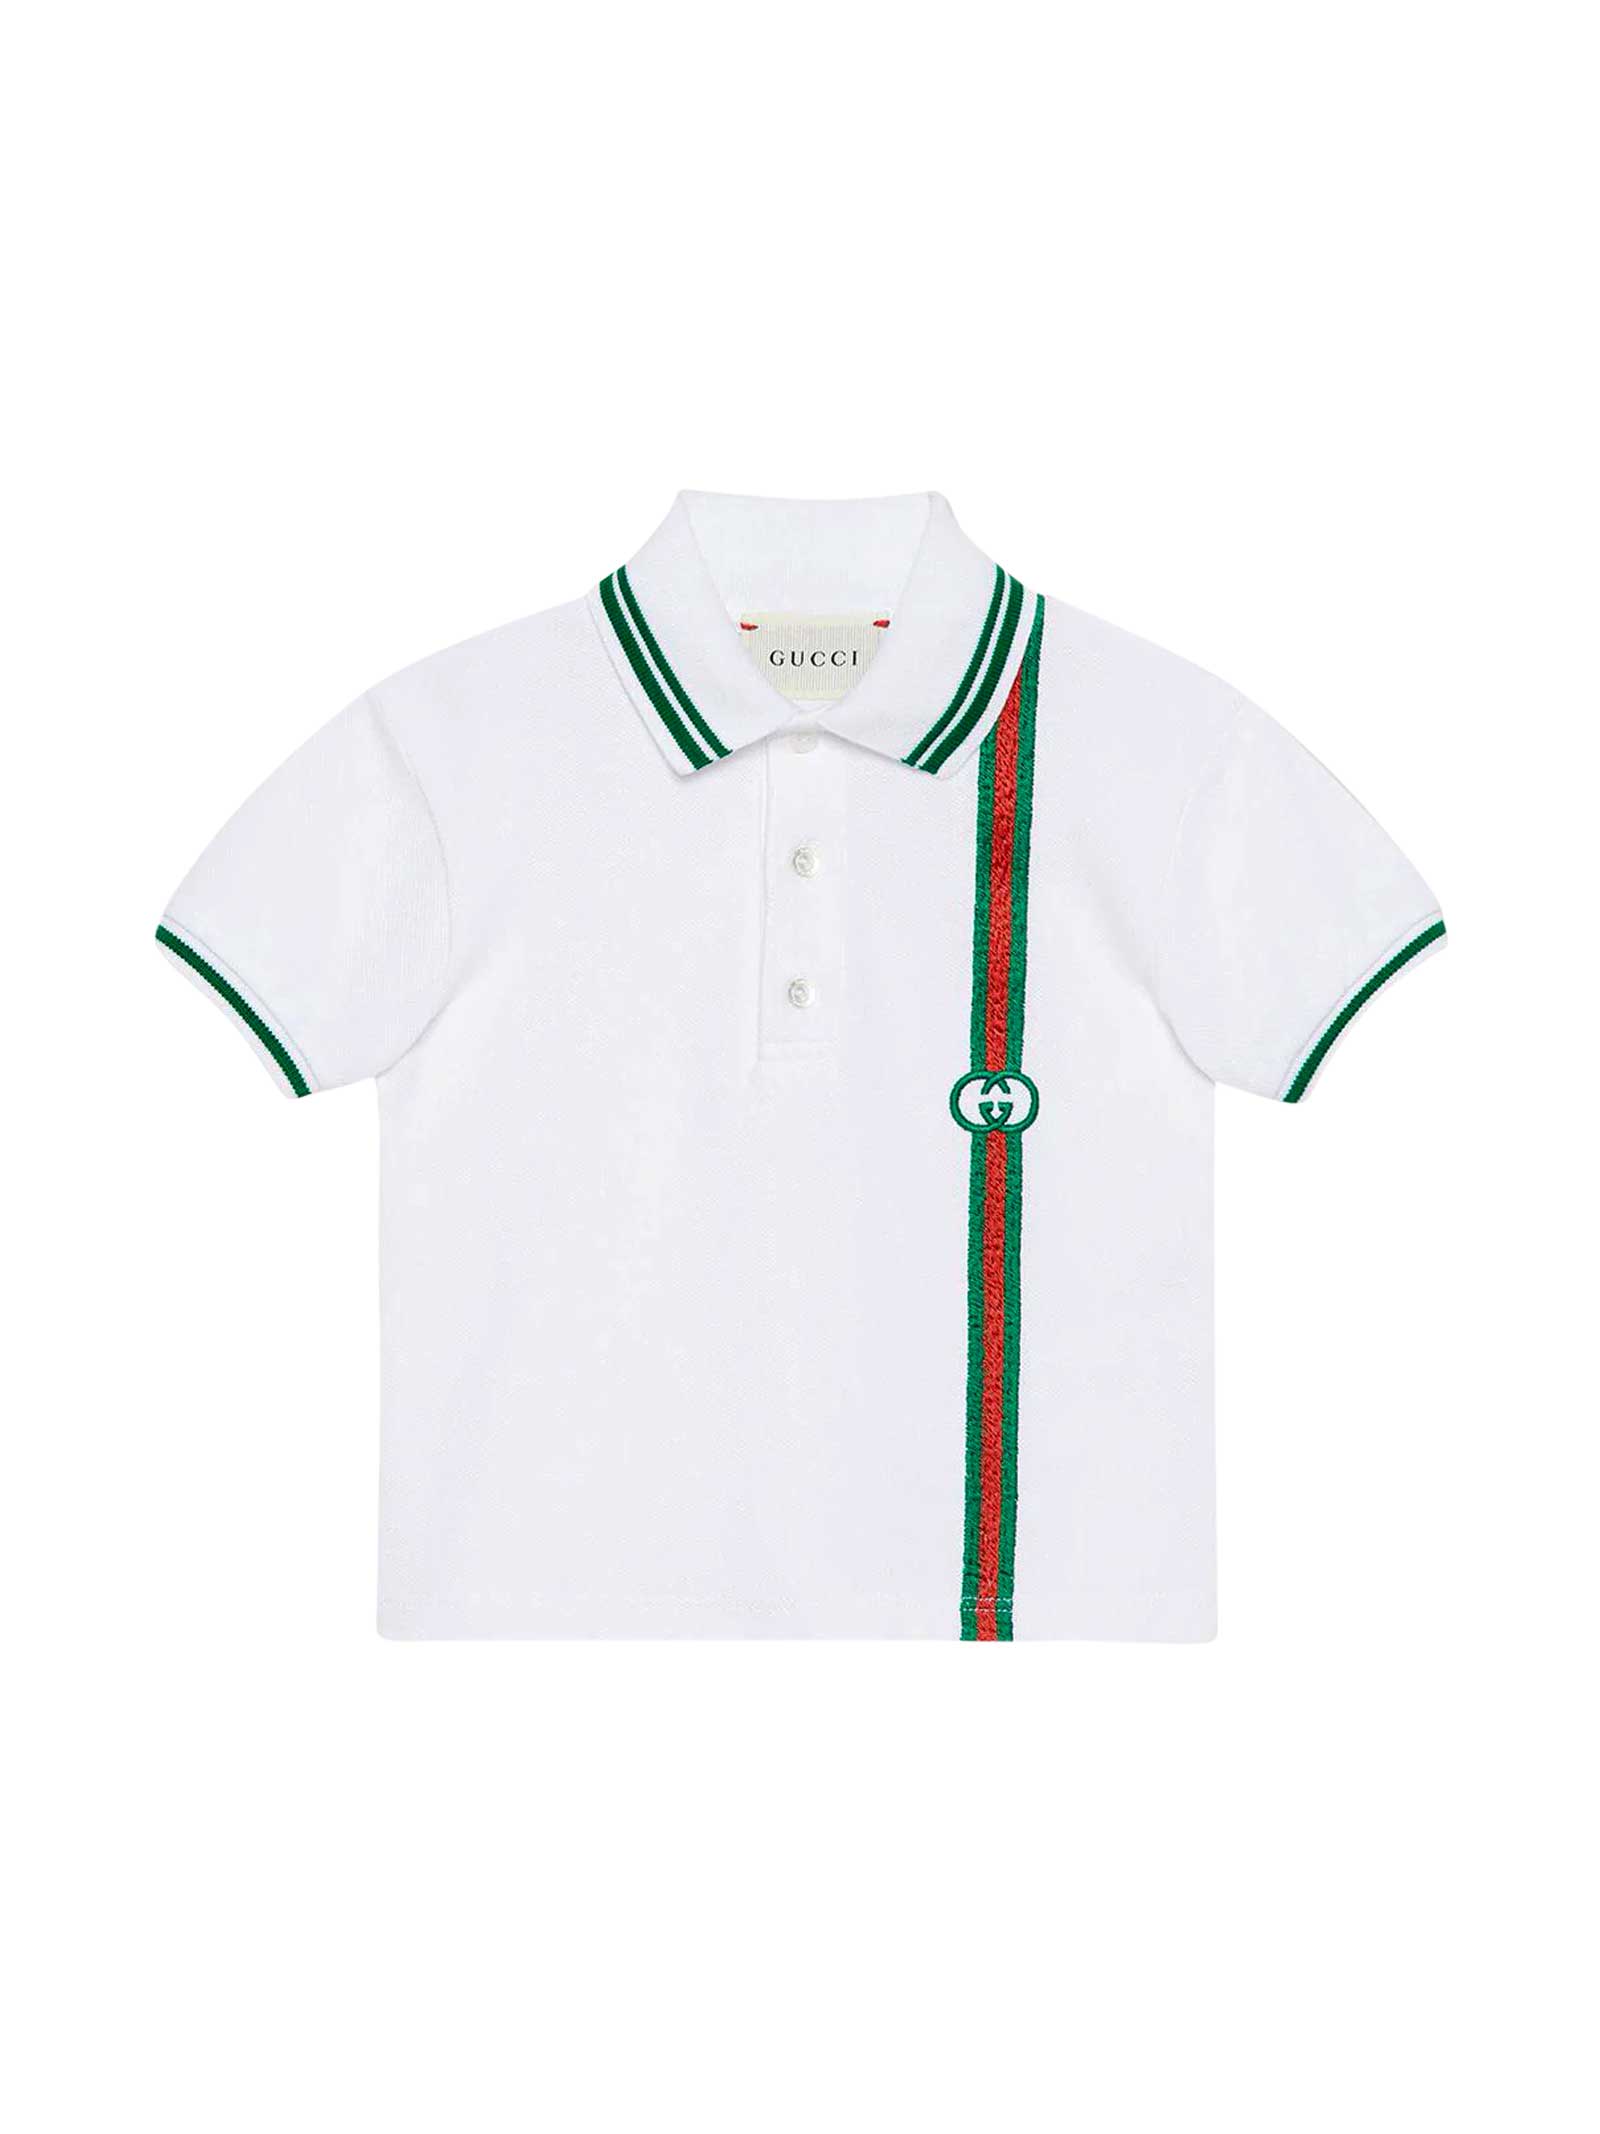 Gucci White Polo Shirt With Green And Red Details